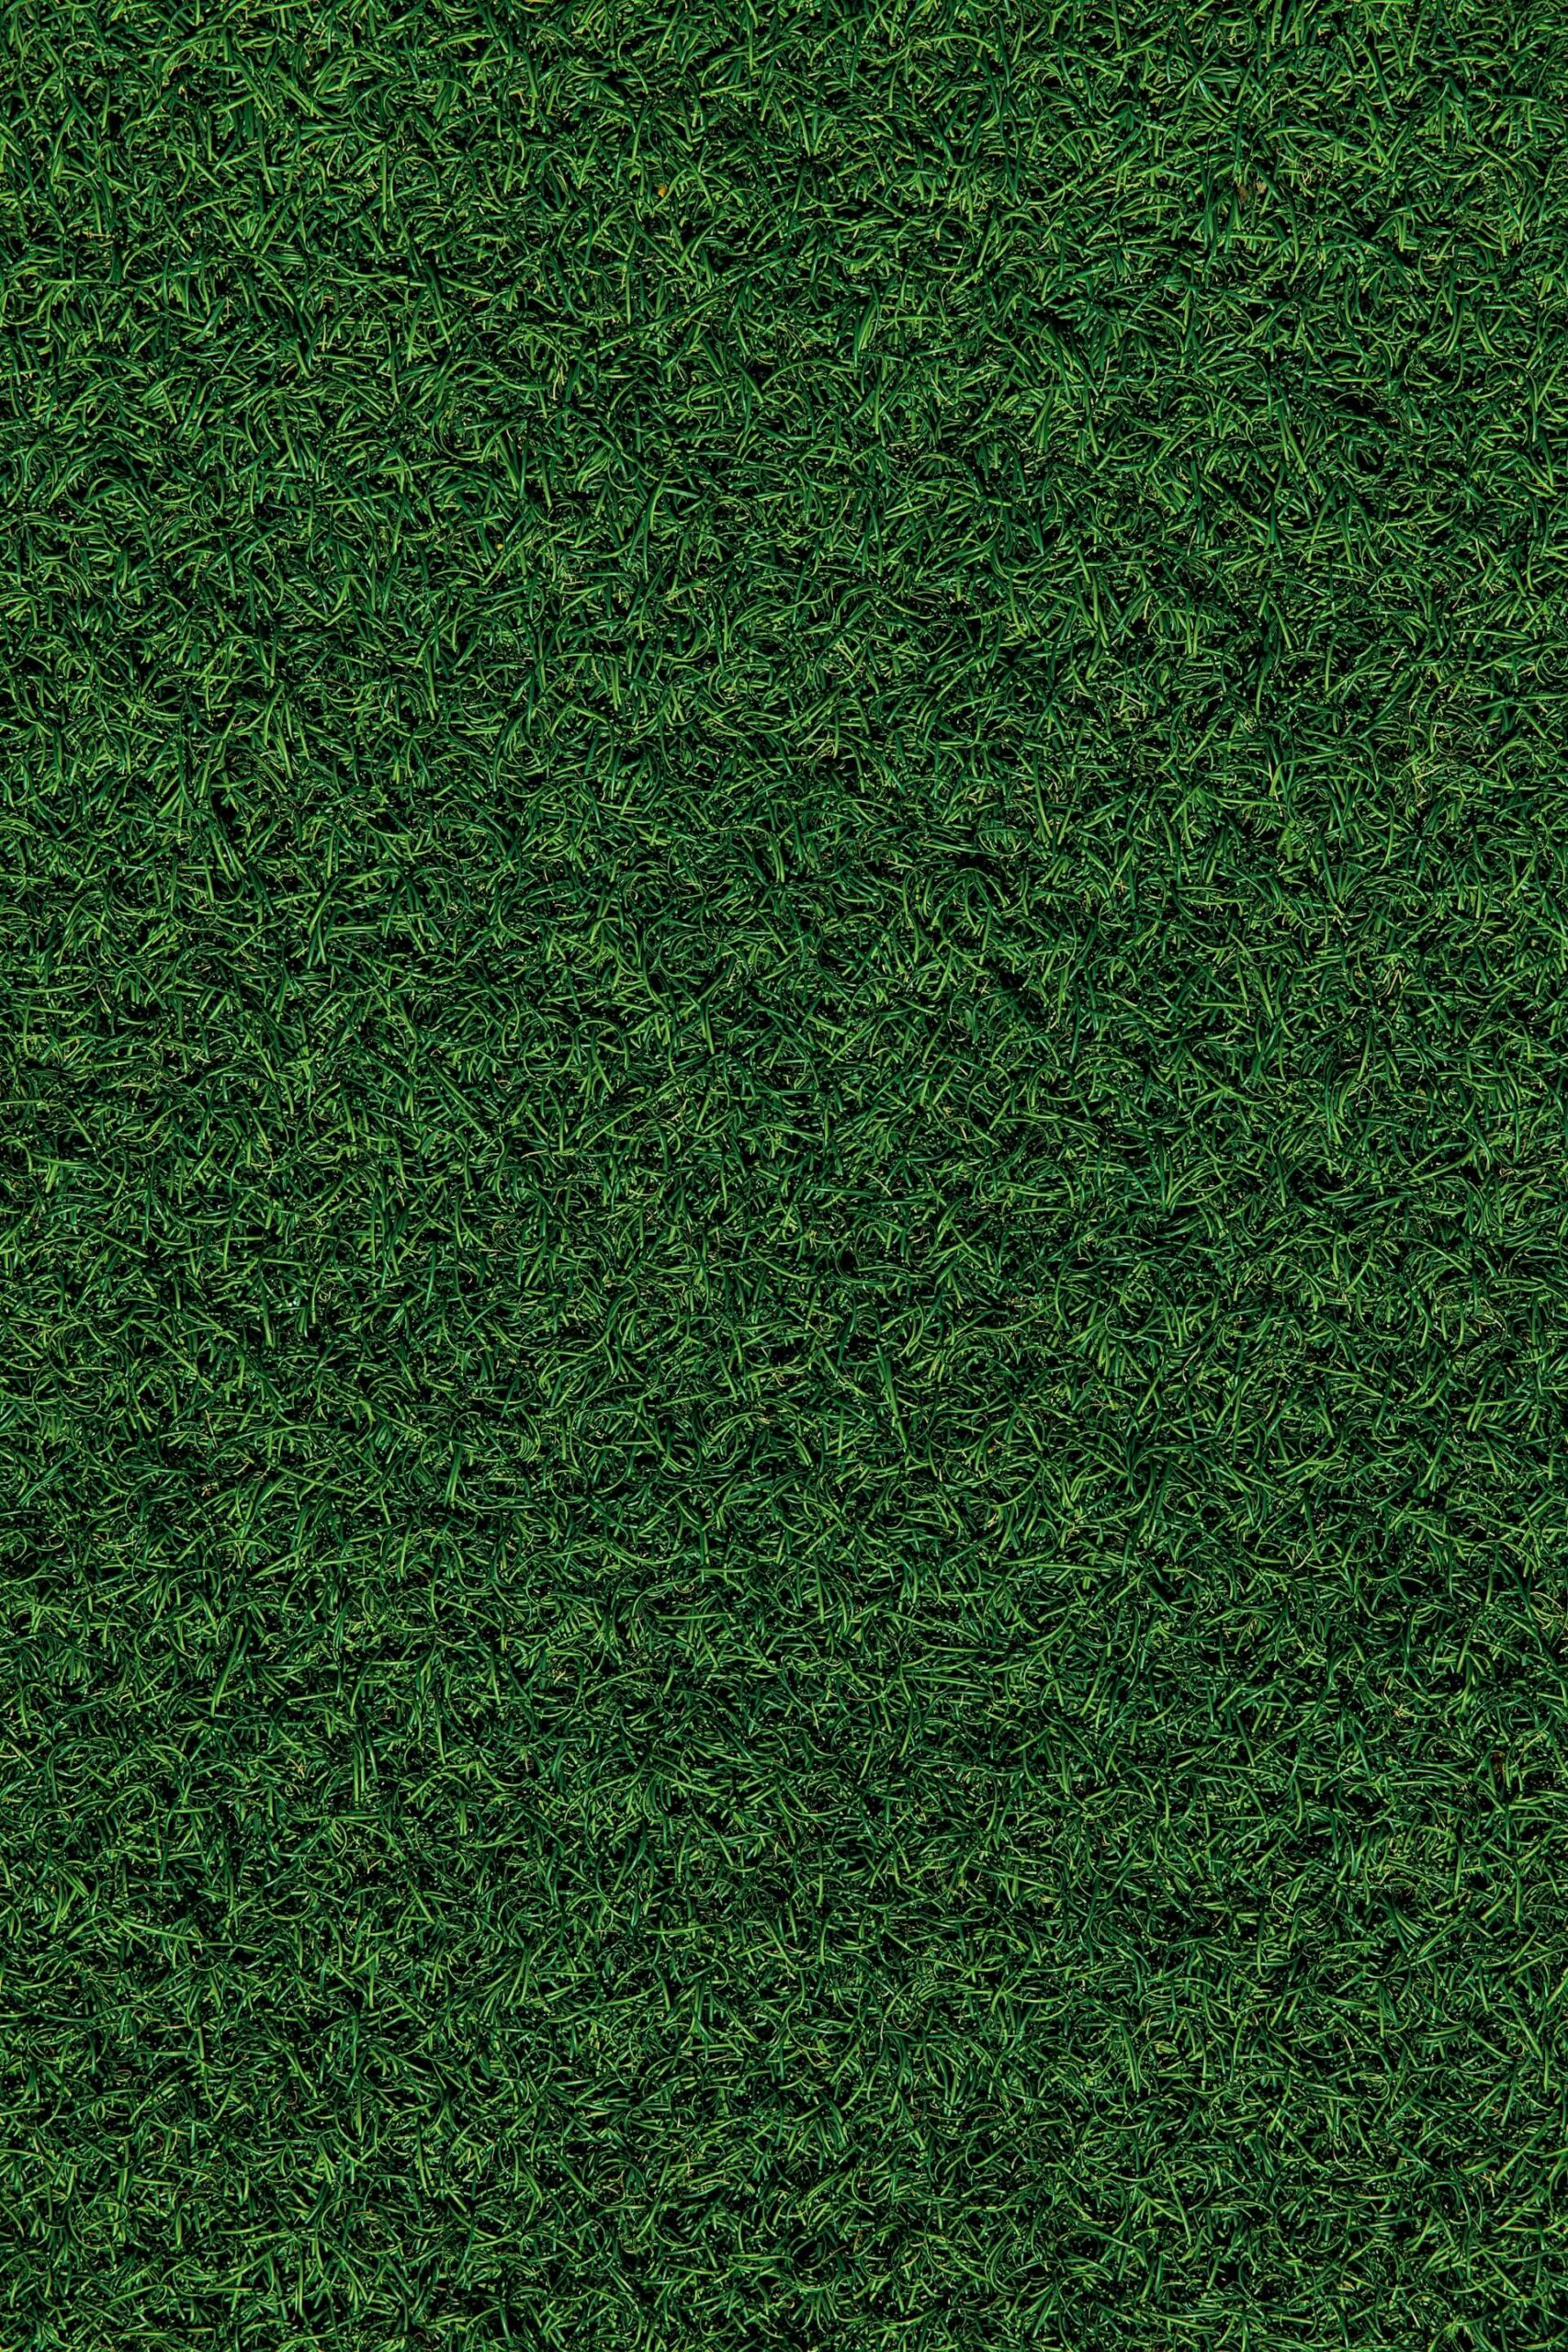 A close up of a lawn